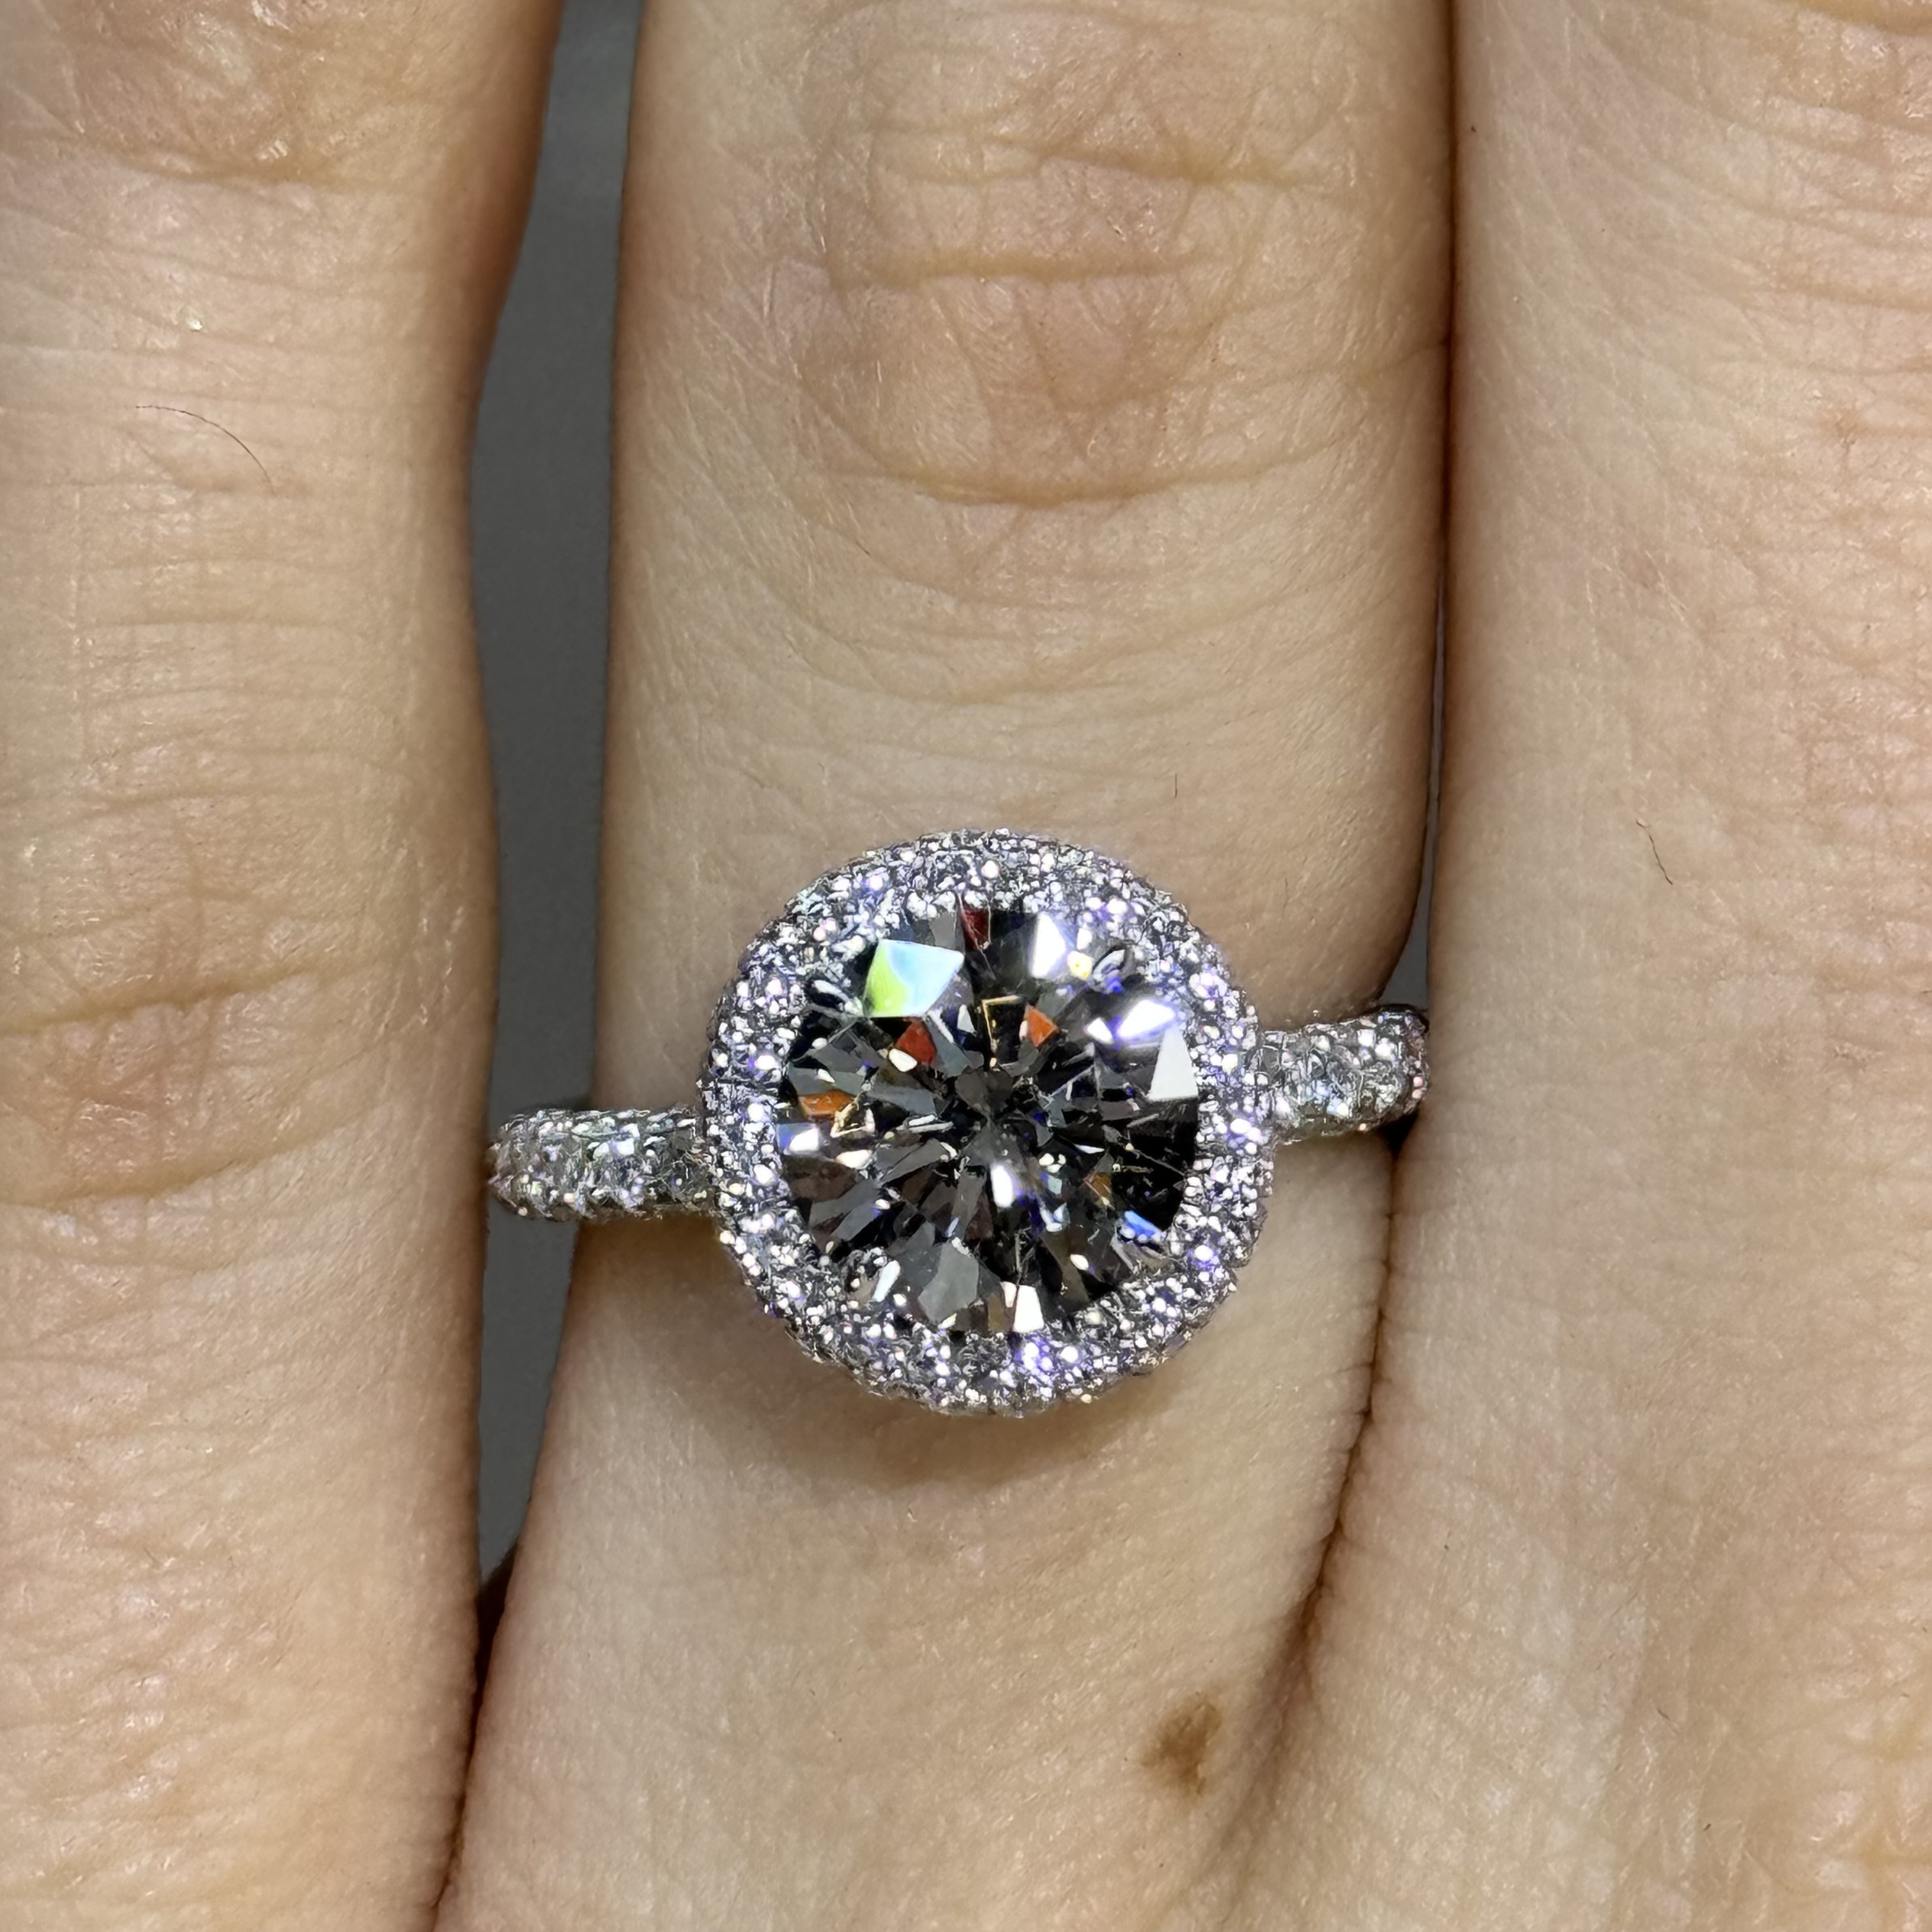 GIA 1.69ct G SI1 Earth Mined "Amielle" Engagement Ring Image 2 Forever Diamonds New York, NY